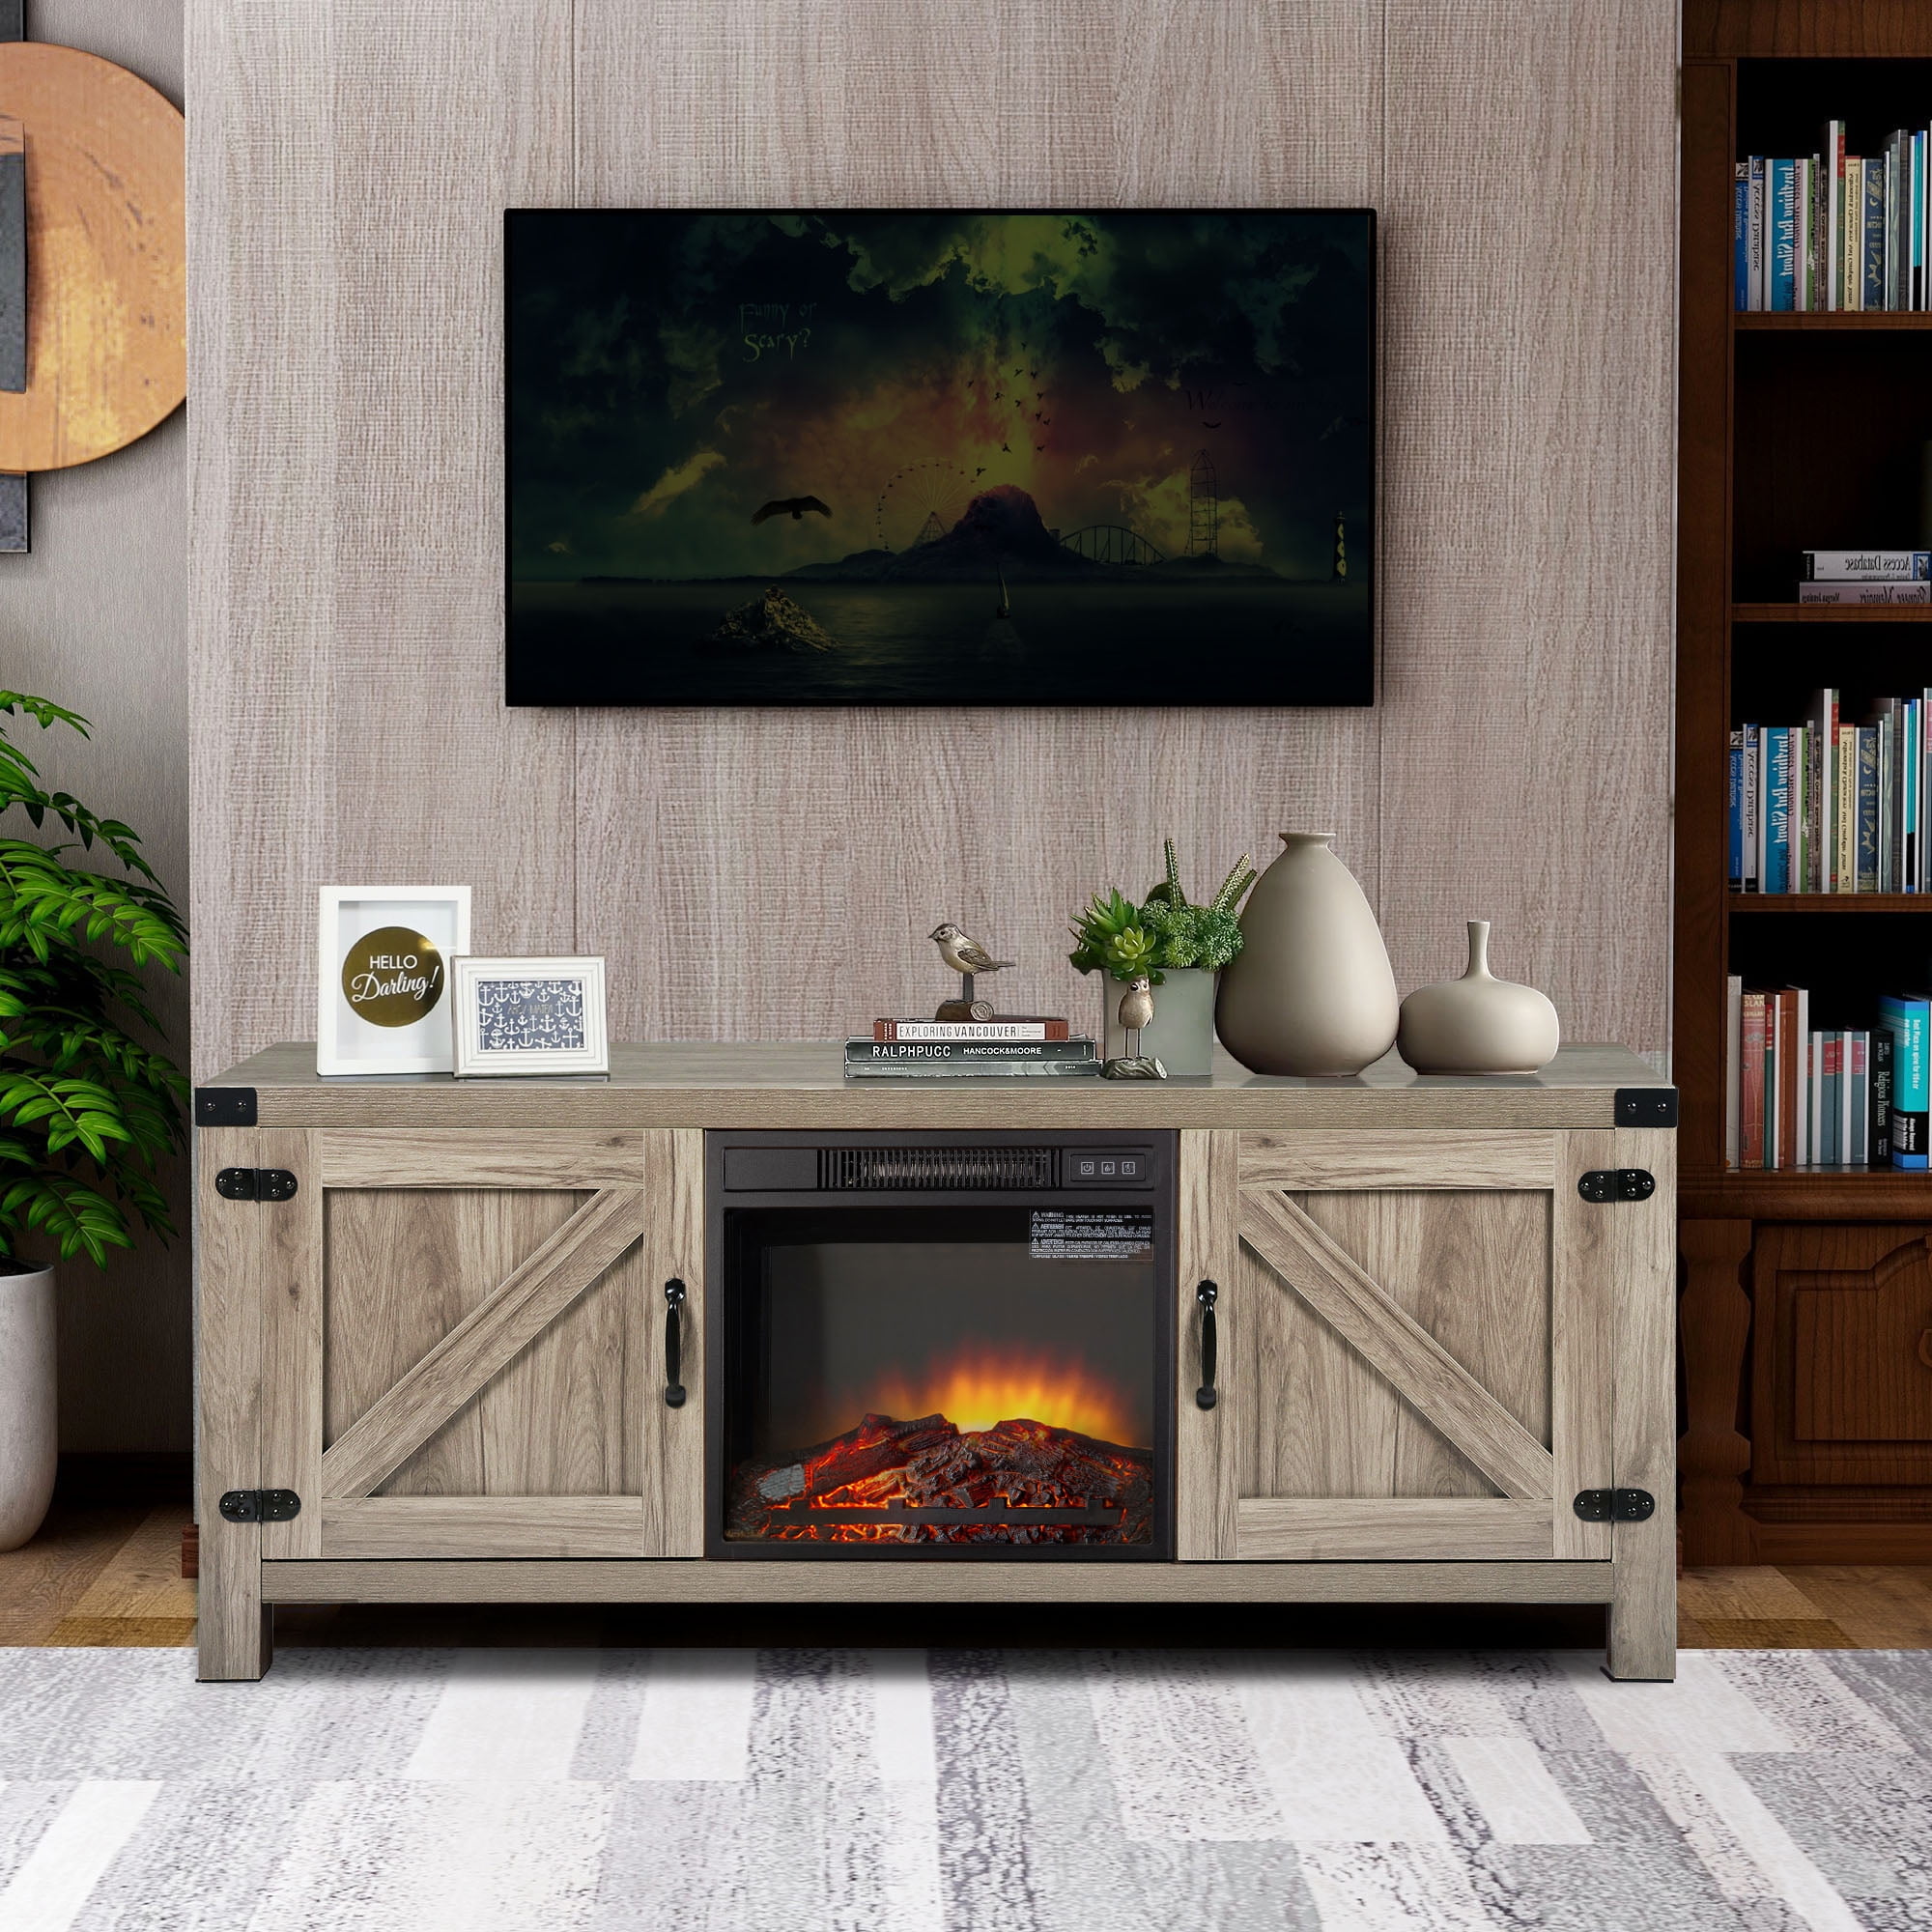 Details about   Electric Fireplace TV Stand Media Storage Television Console Shelves for 58" TVs